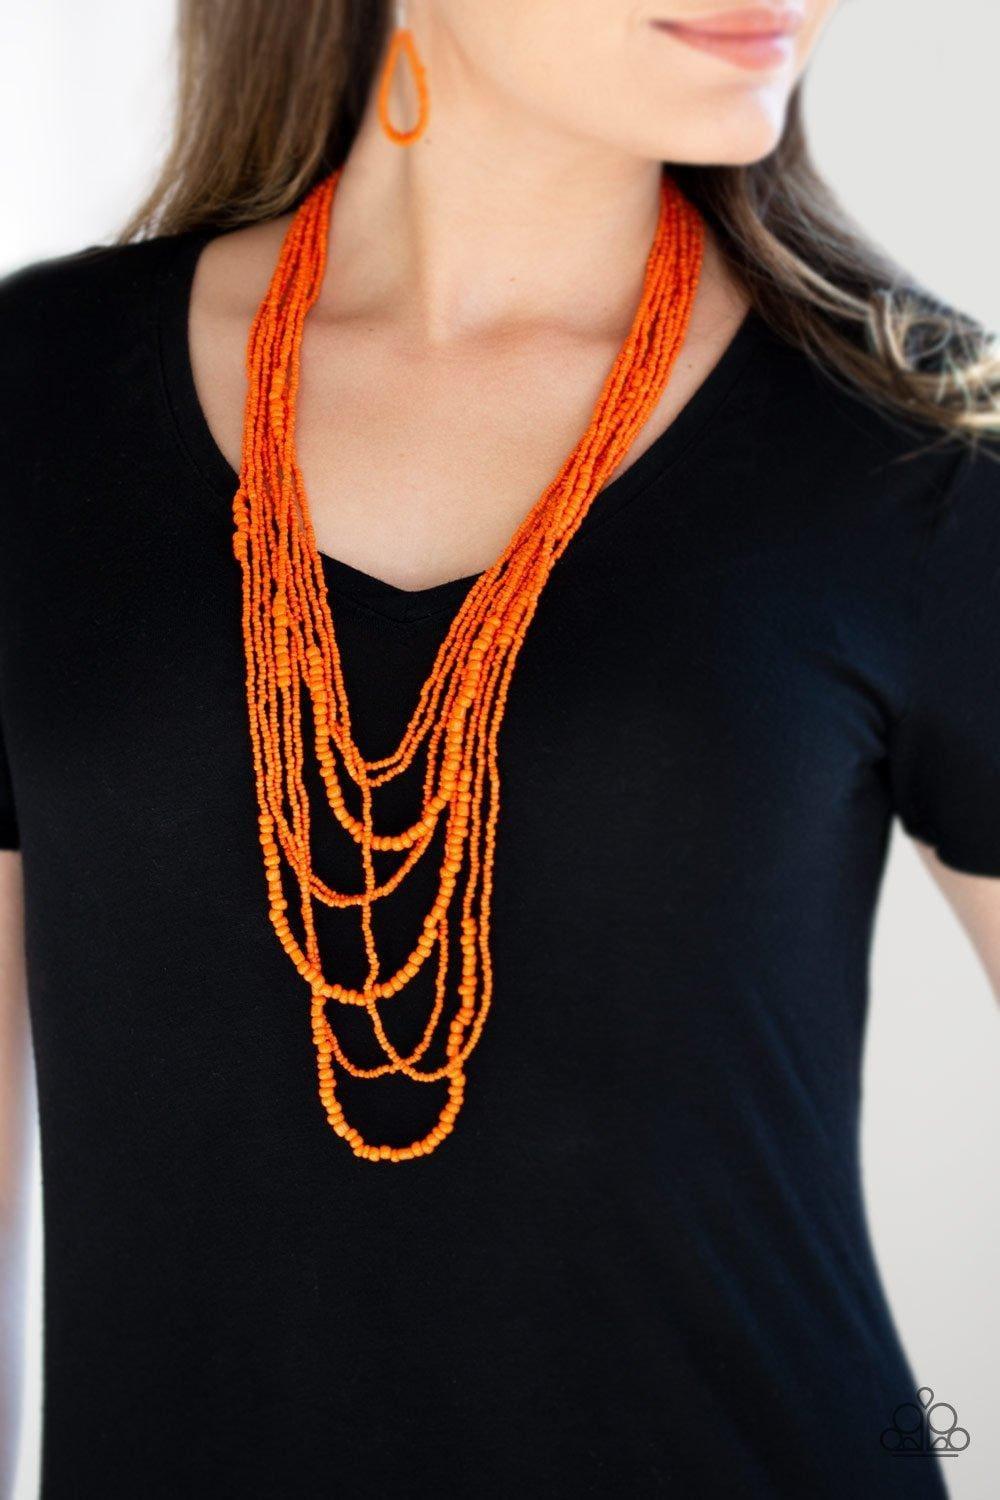 Paparazzi Accessories - Totally Tonga - Orange Necklace - Bling by JessieK